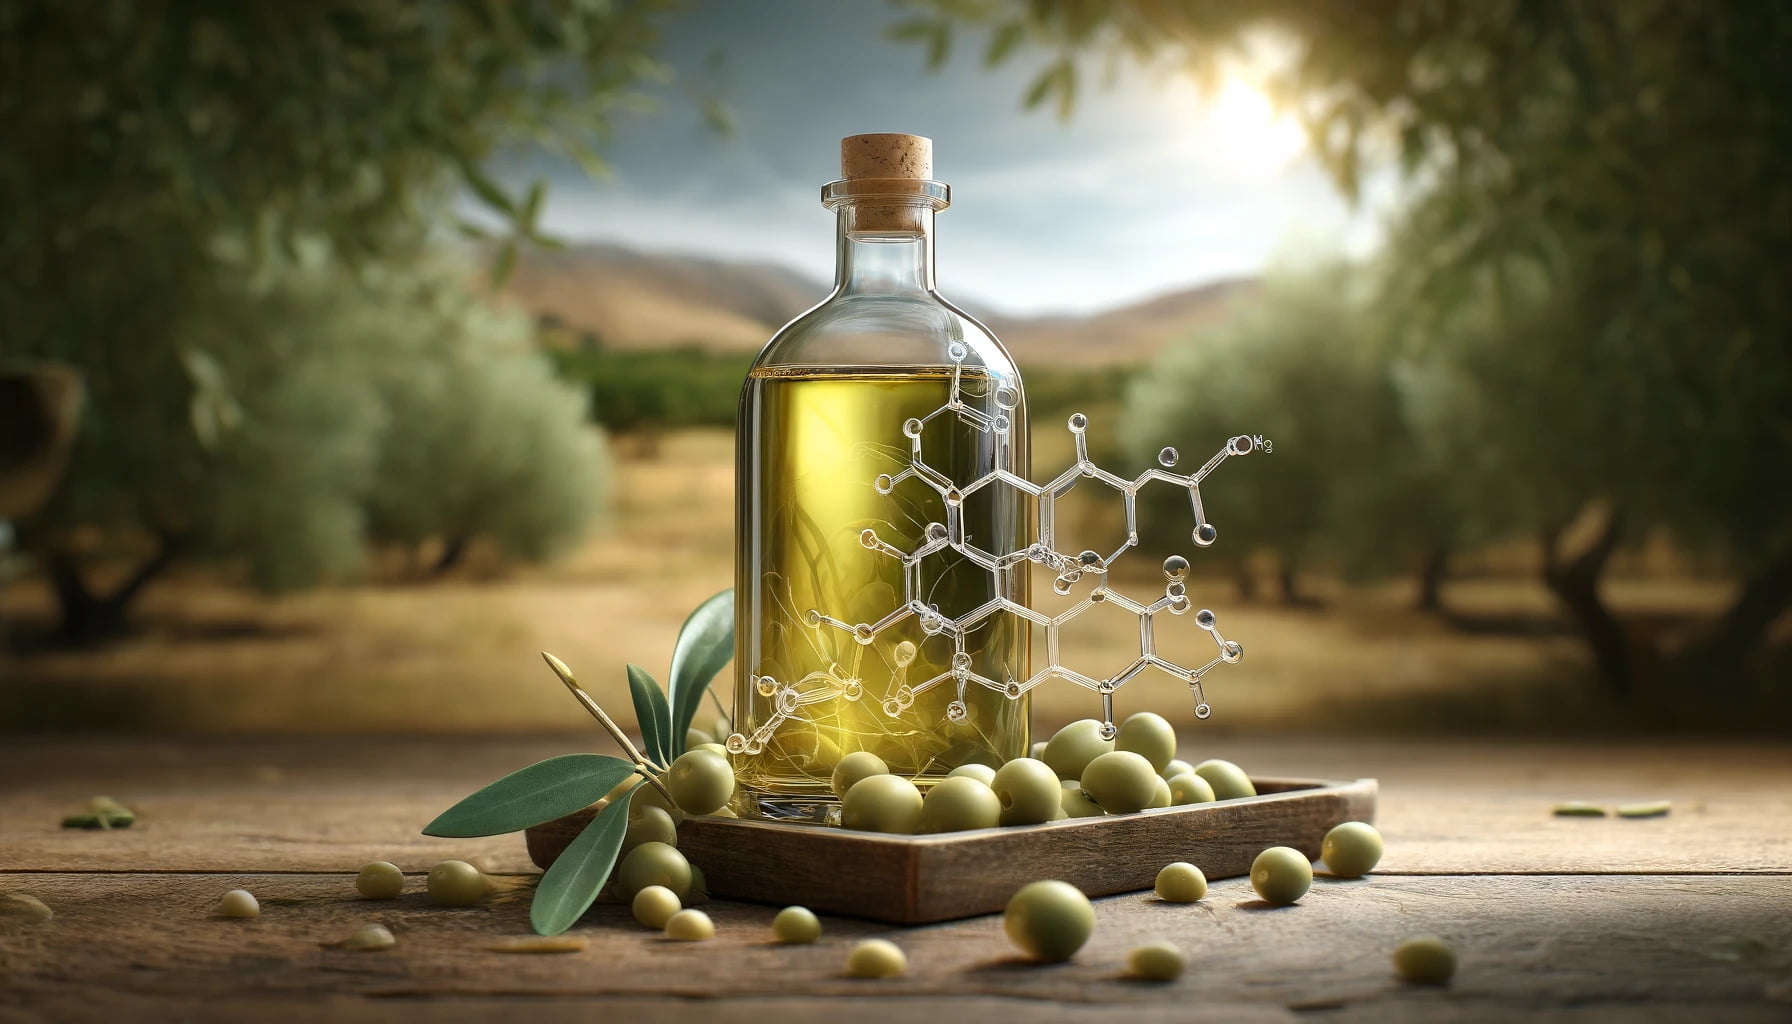 A photorealistic image of a bottle of olive oil with its molecular structure artistically incorporated, 